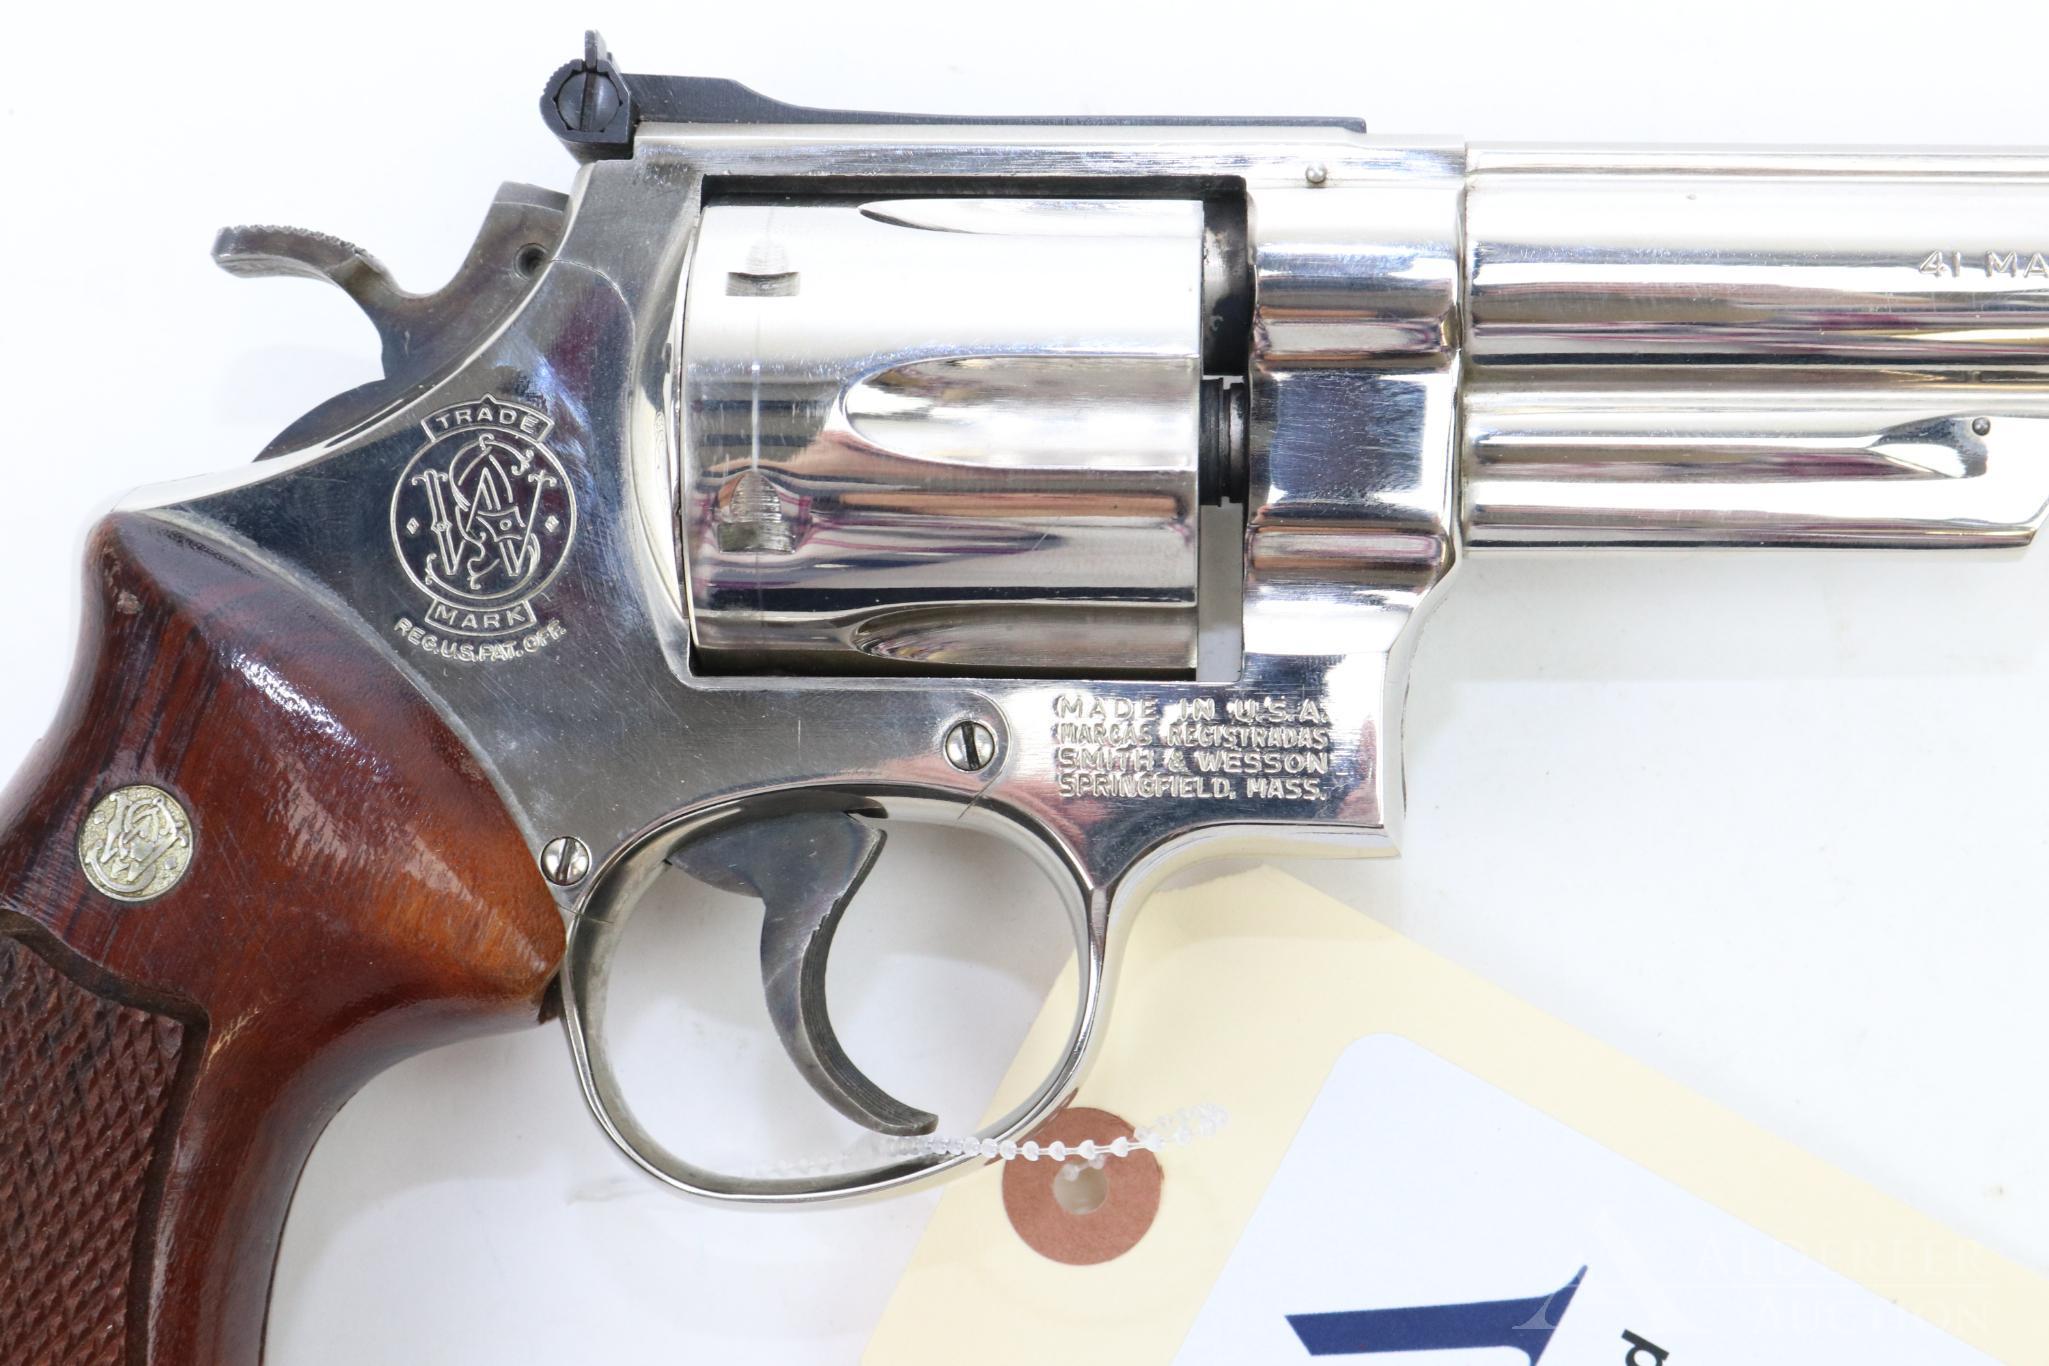 Smith & Wesson 57 double action revolver.